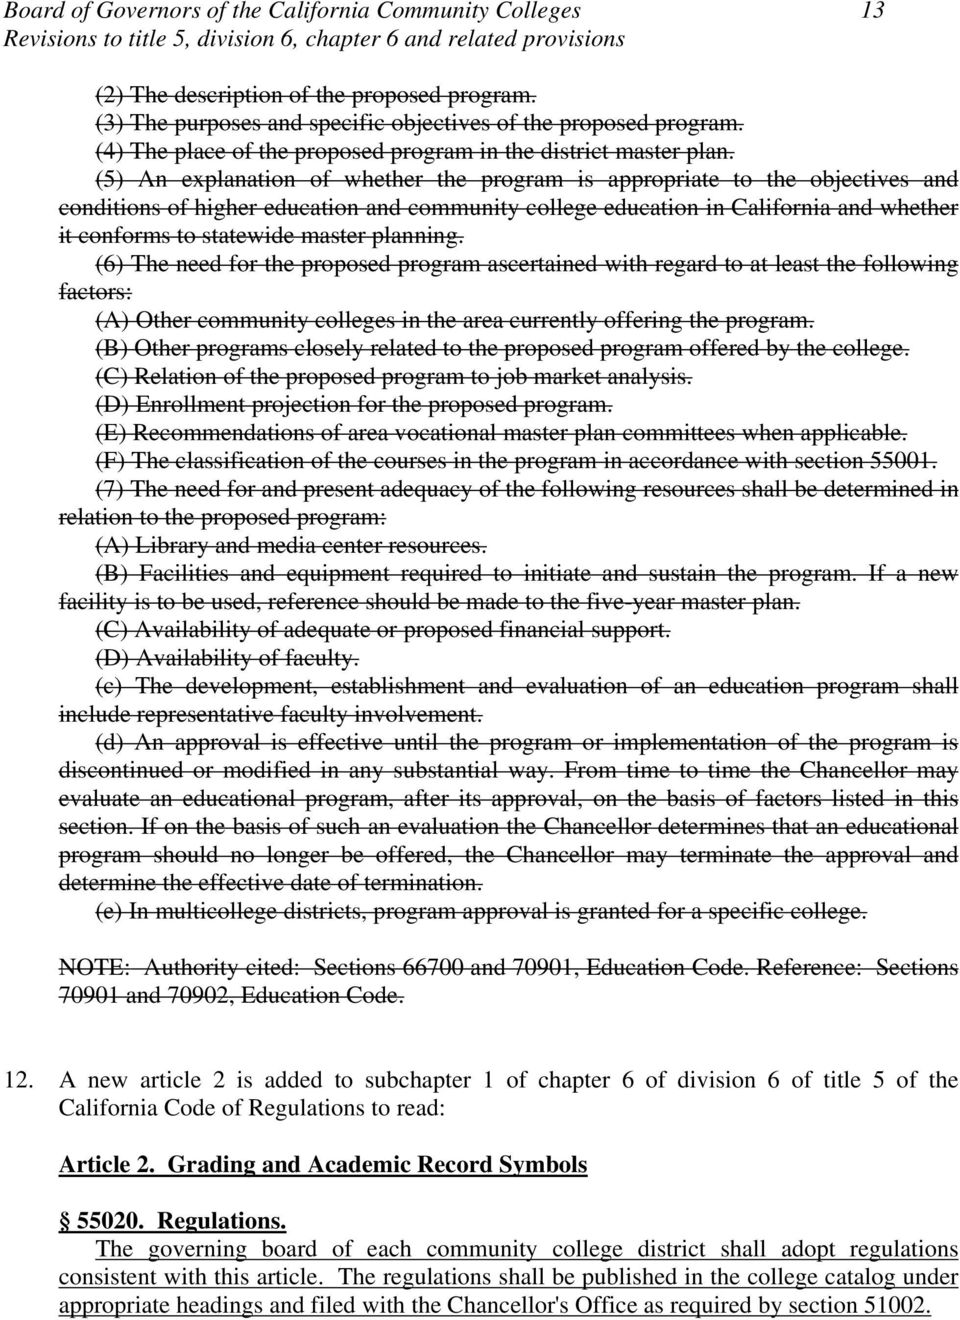 (5) An explanation of whether the program is appropriate to the objectives and conditions of higher education and community college education in California and whether it conforms to statewide master